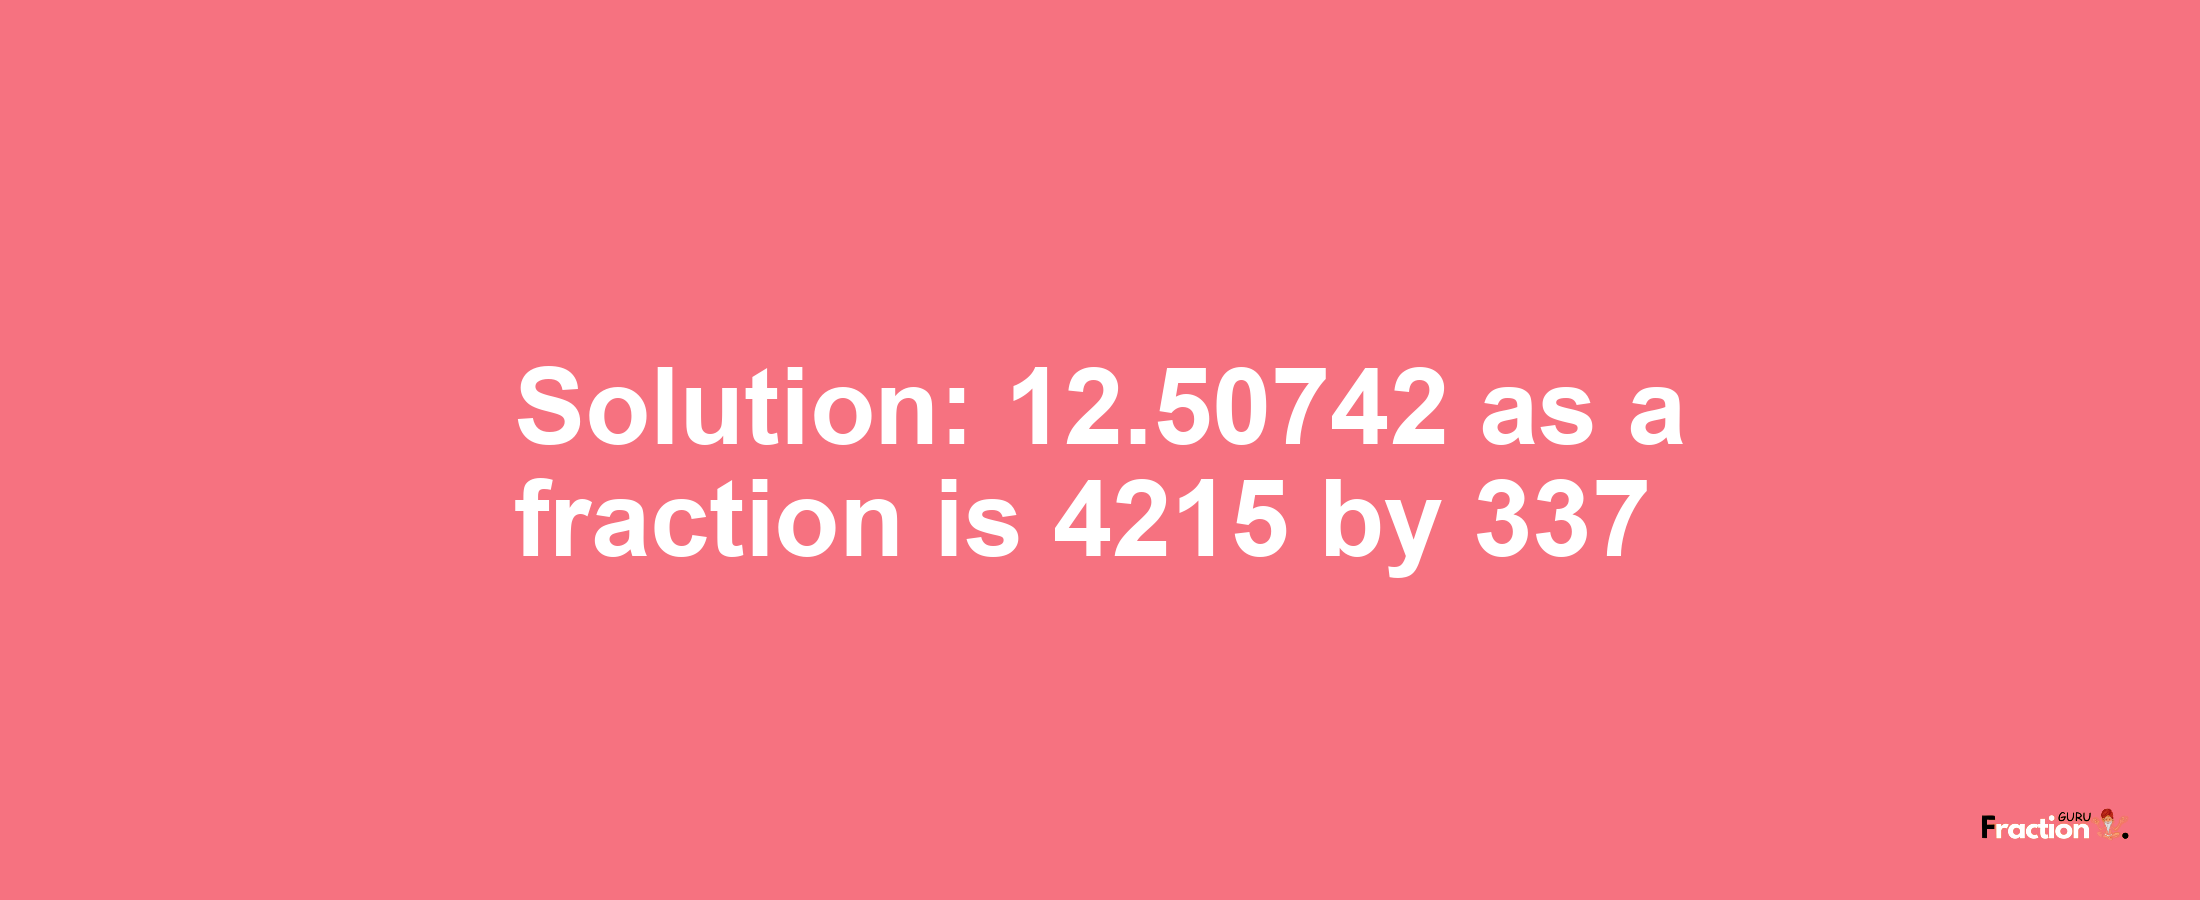 Solution:12.50742 as a fraction is 4215/337